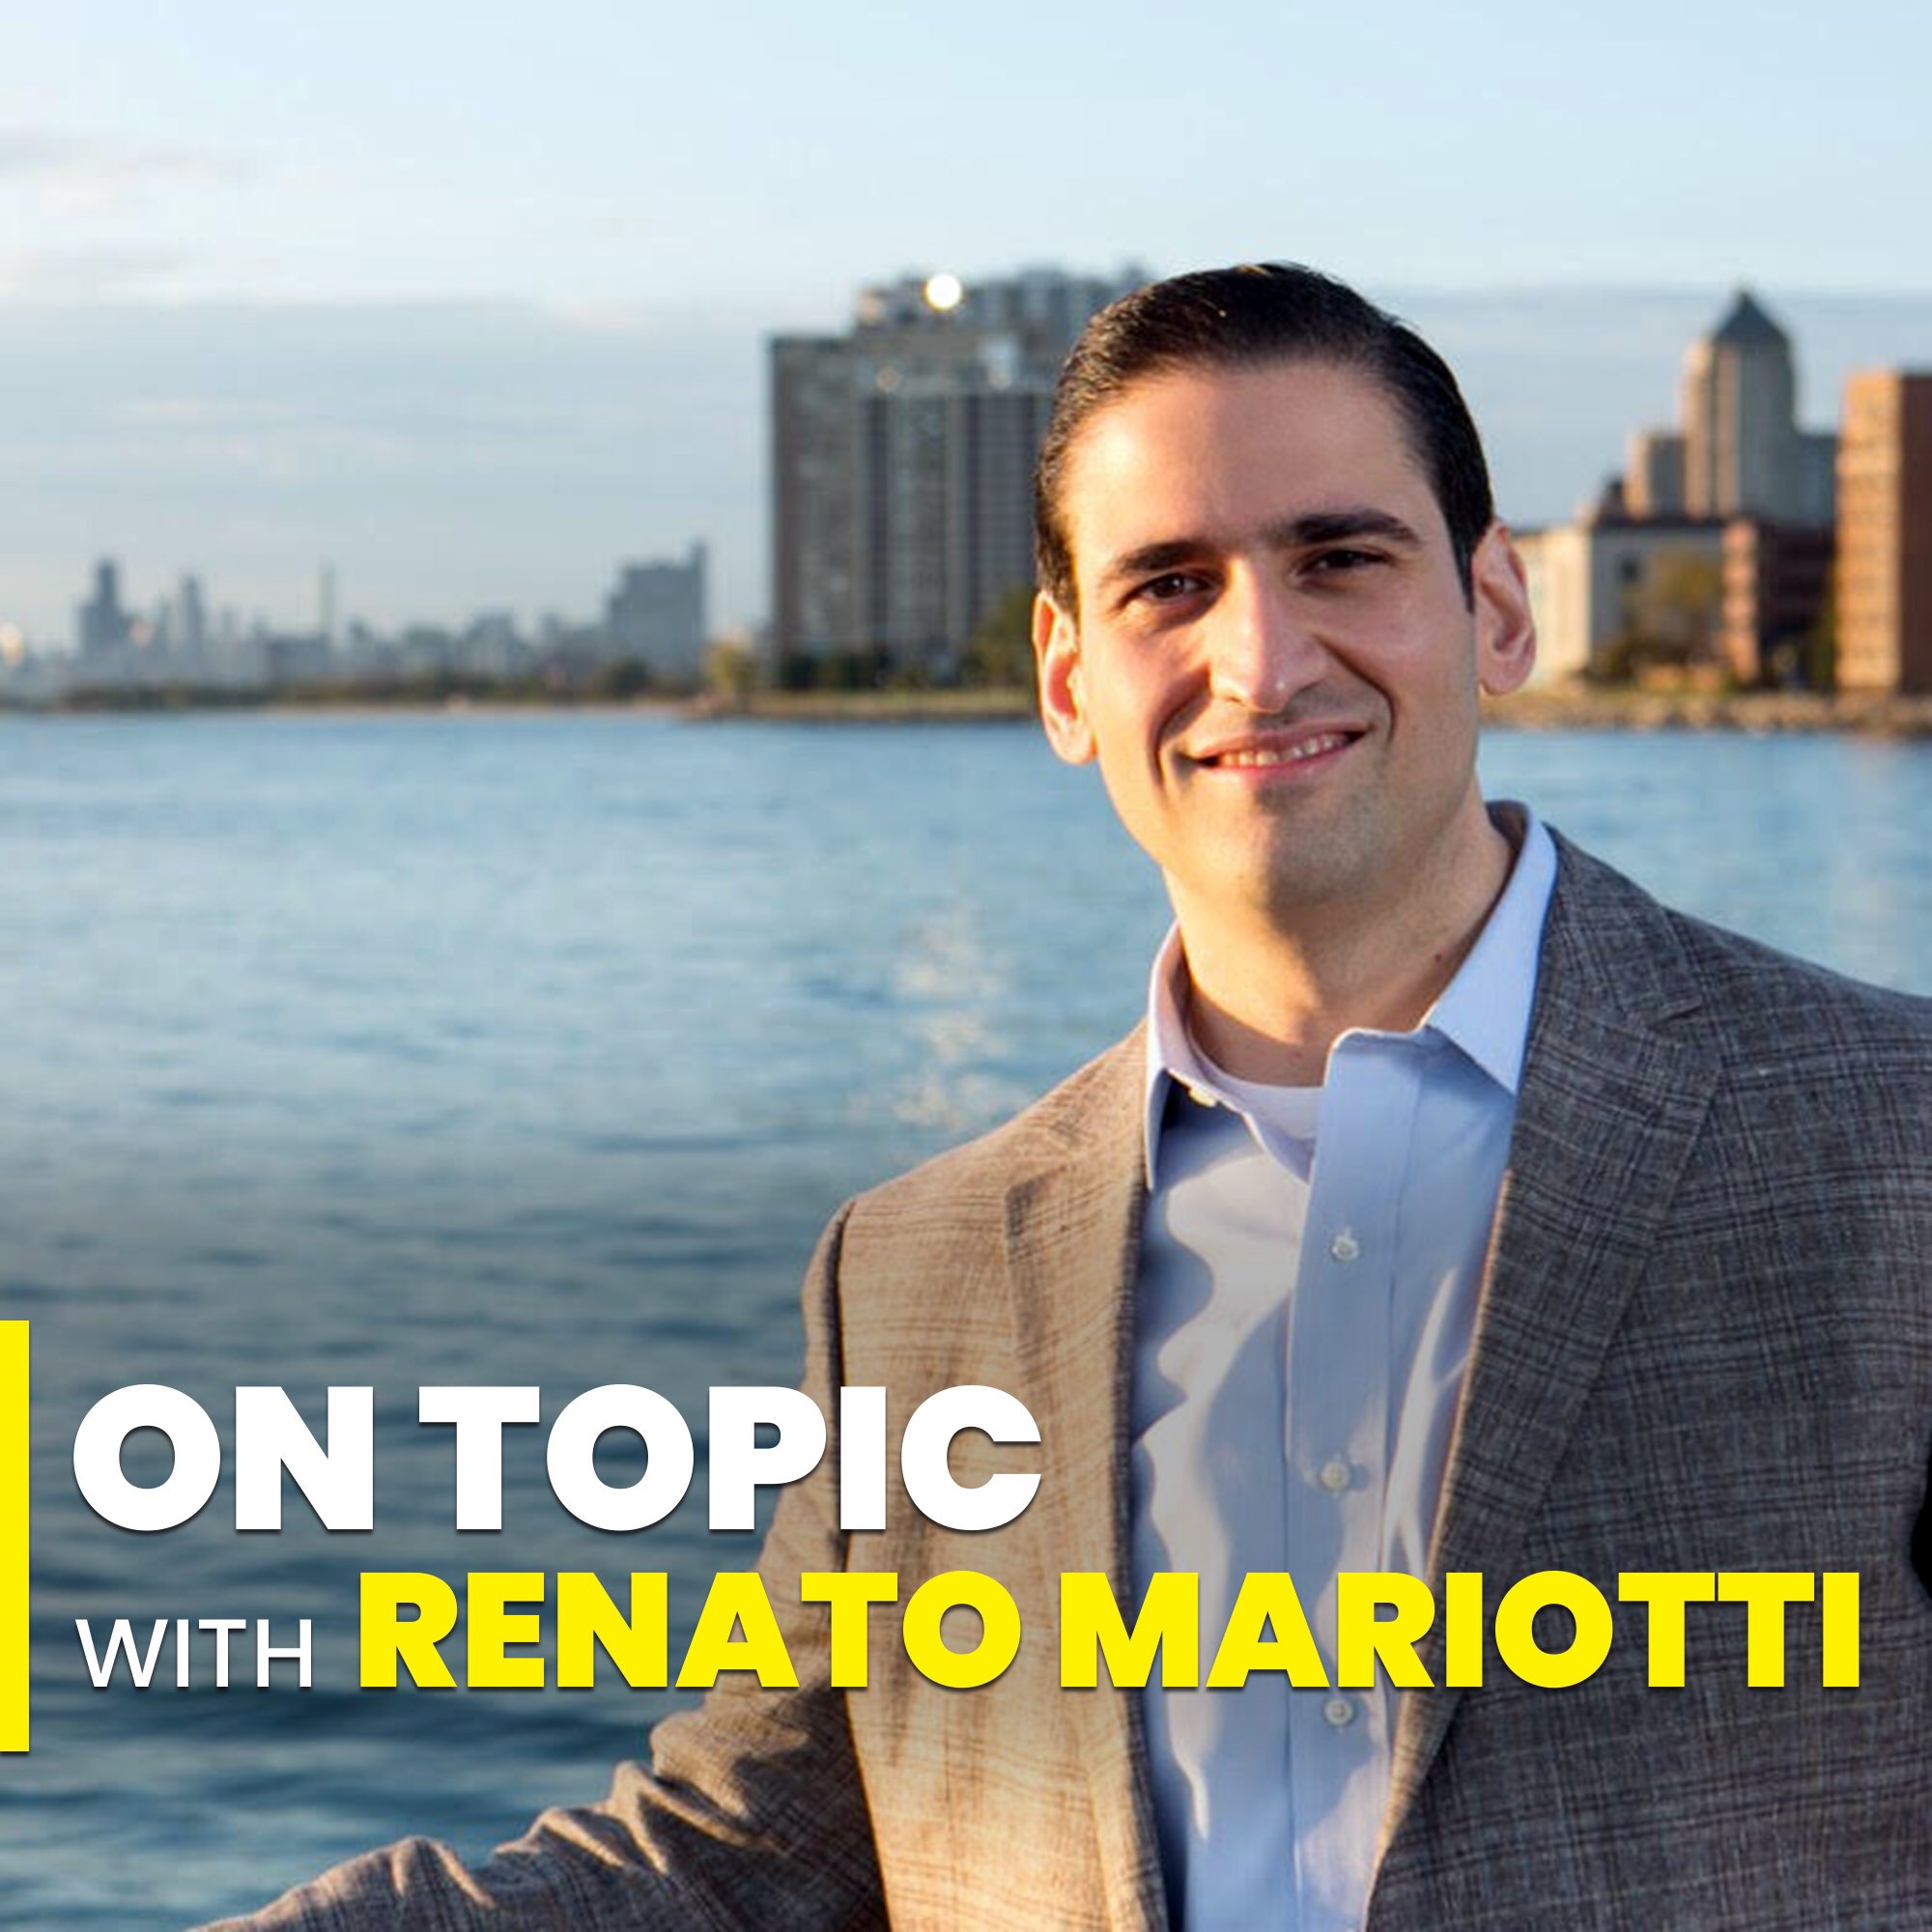 On Topic with Rentao Mariotti